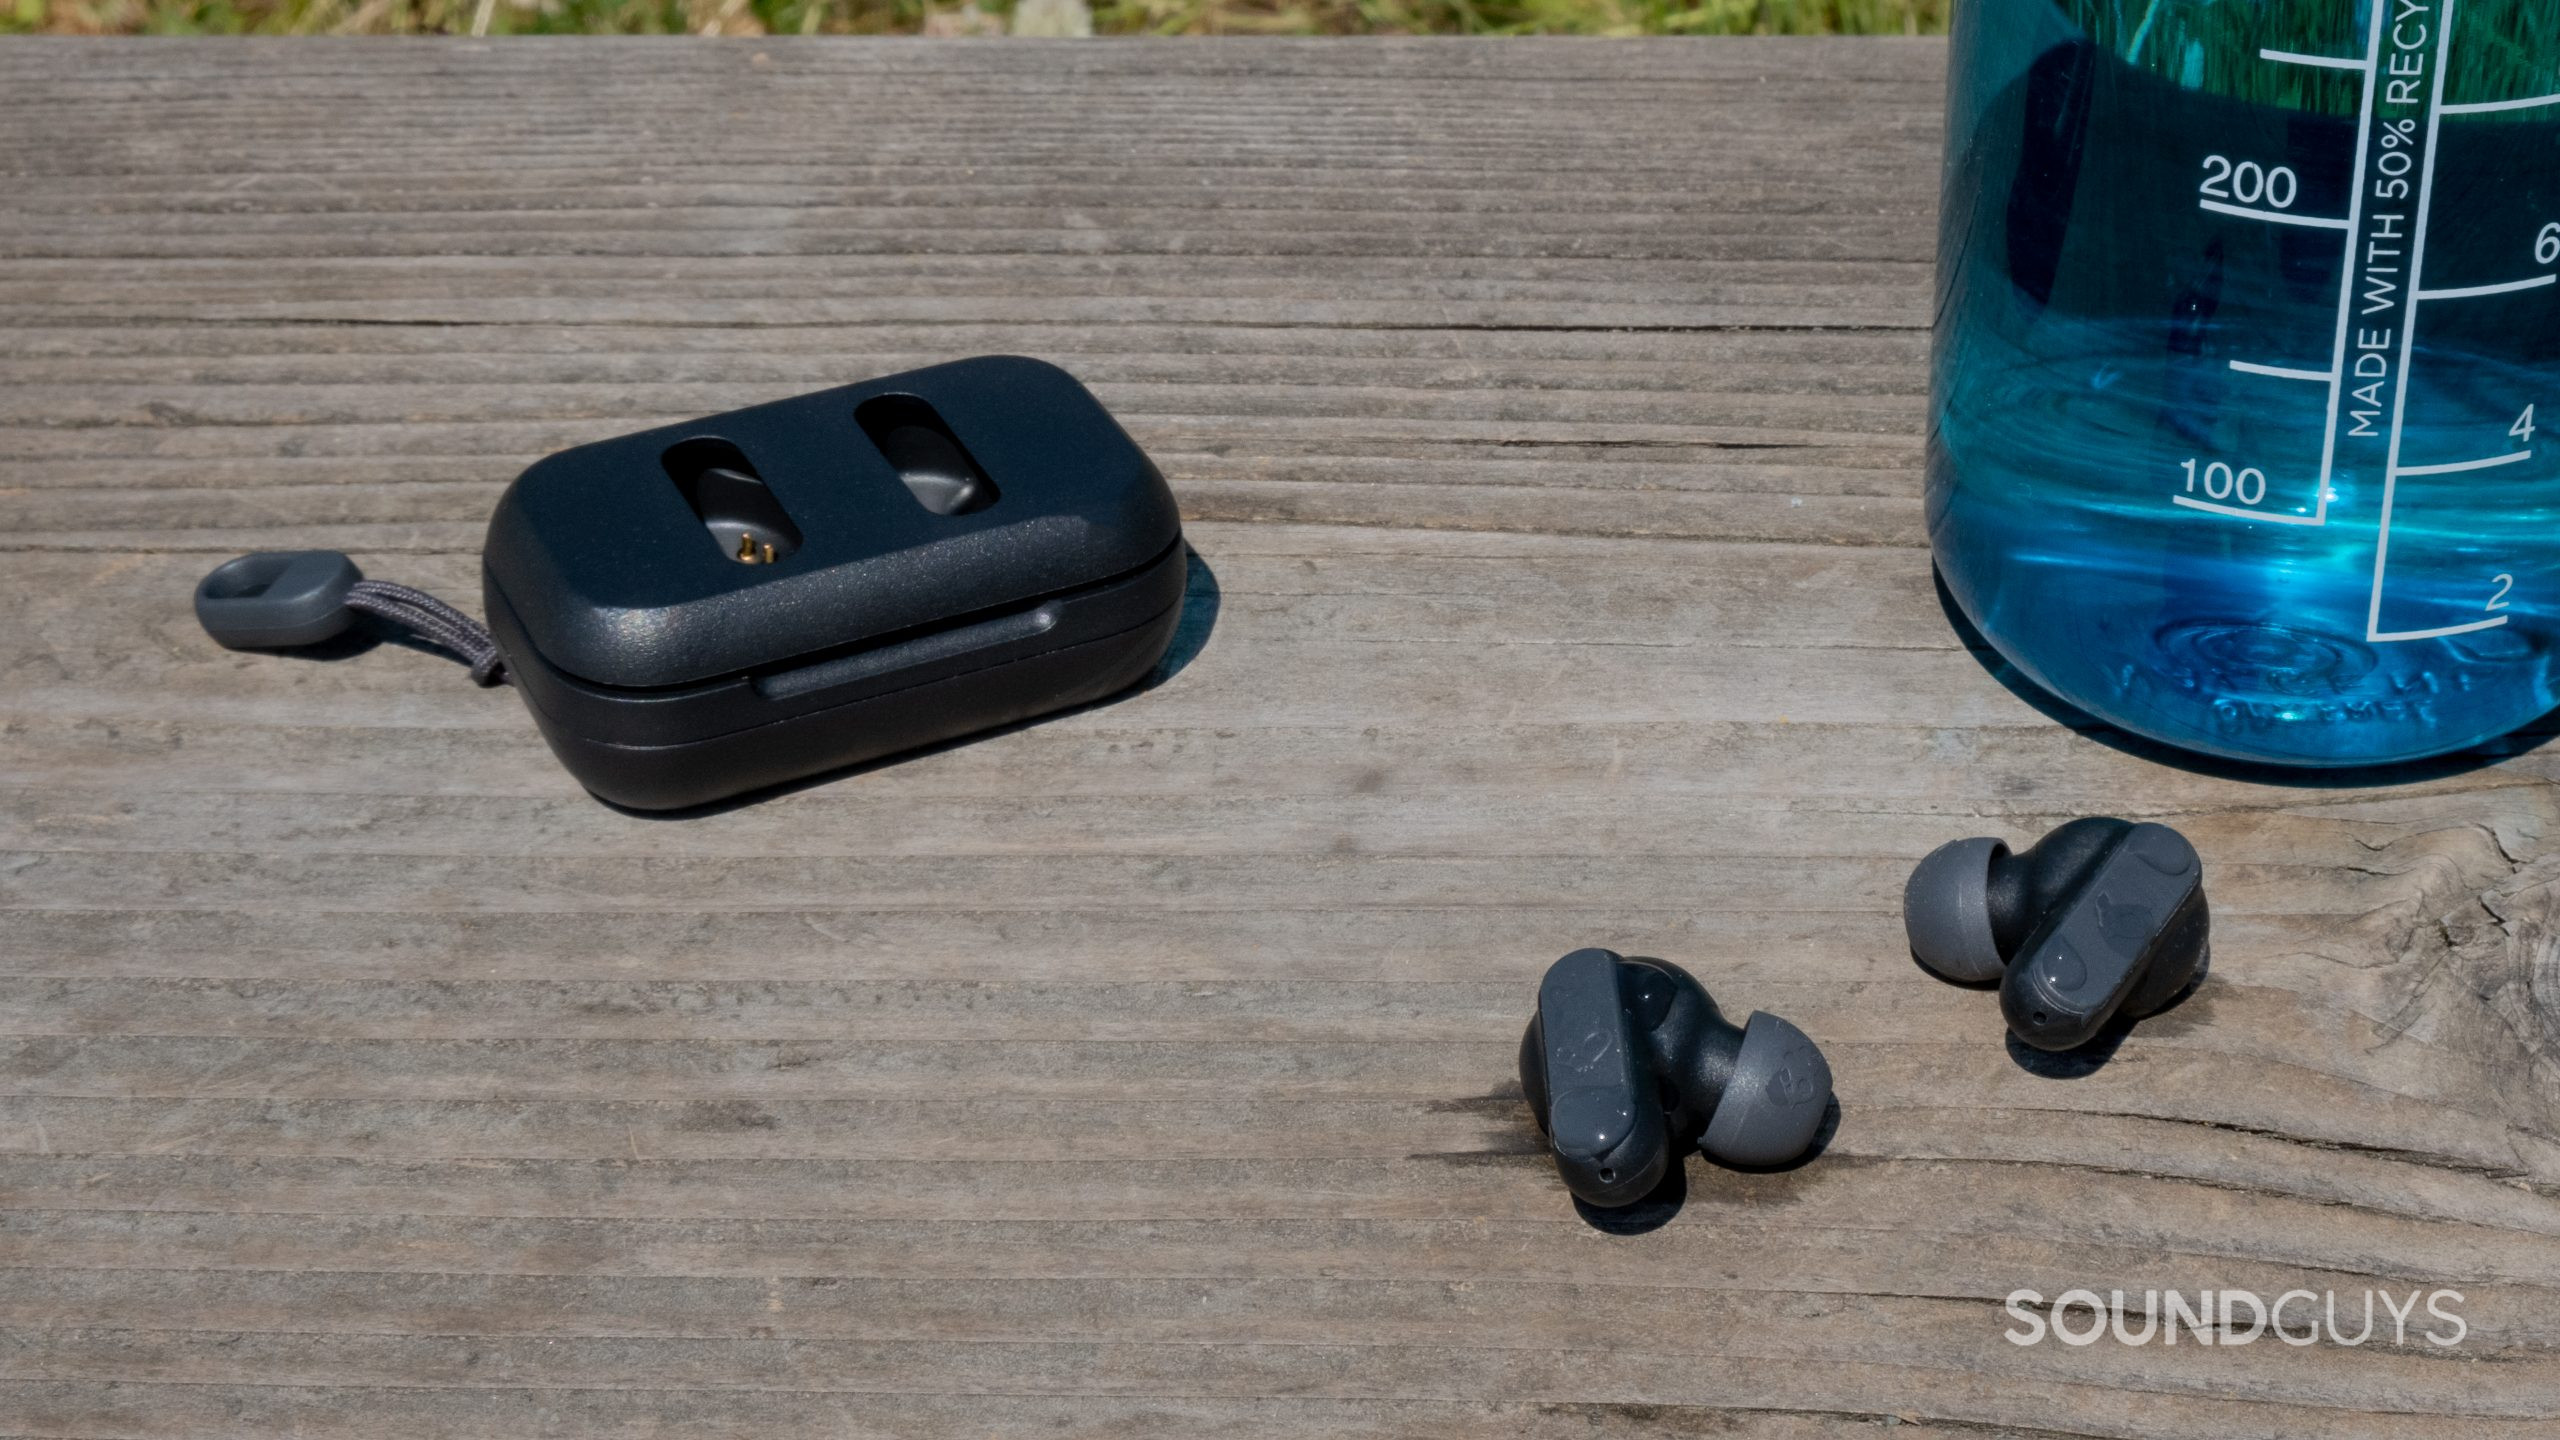 On a wood surface outside the Skullcandy Dime 2 buds have droplets of water on them next to a water bottle and the case.